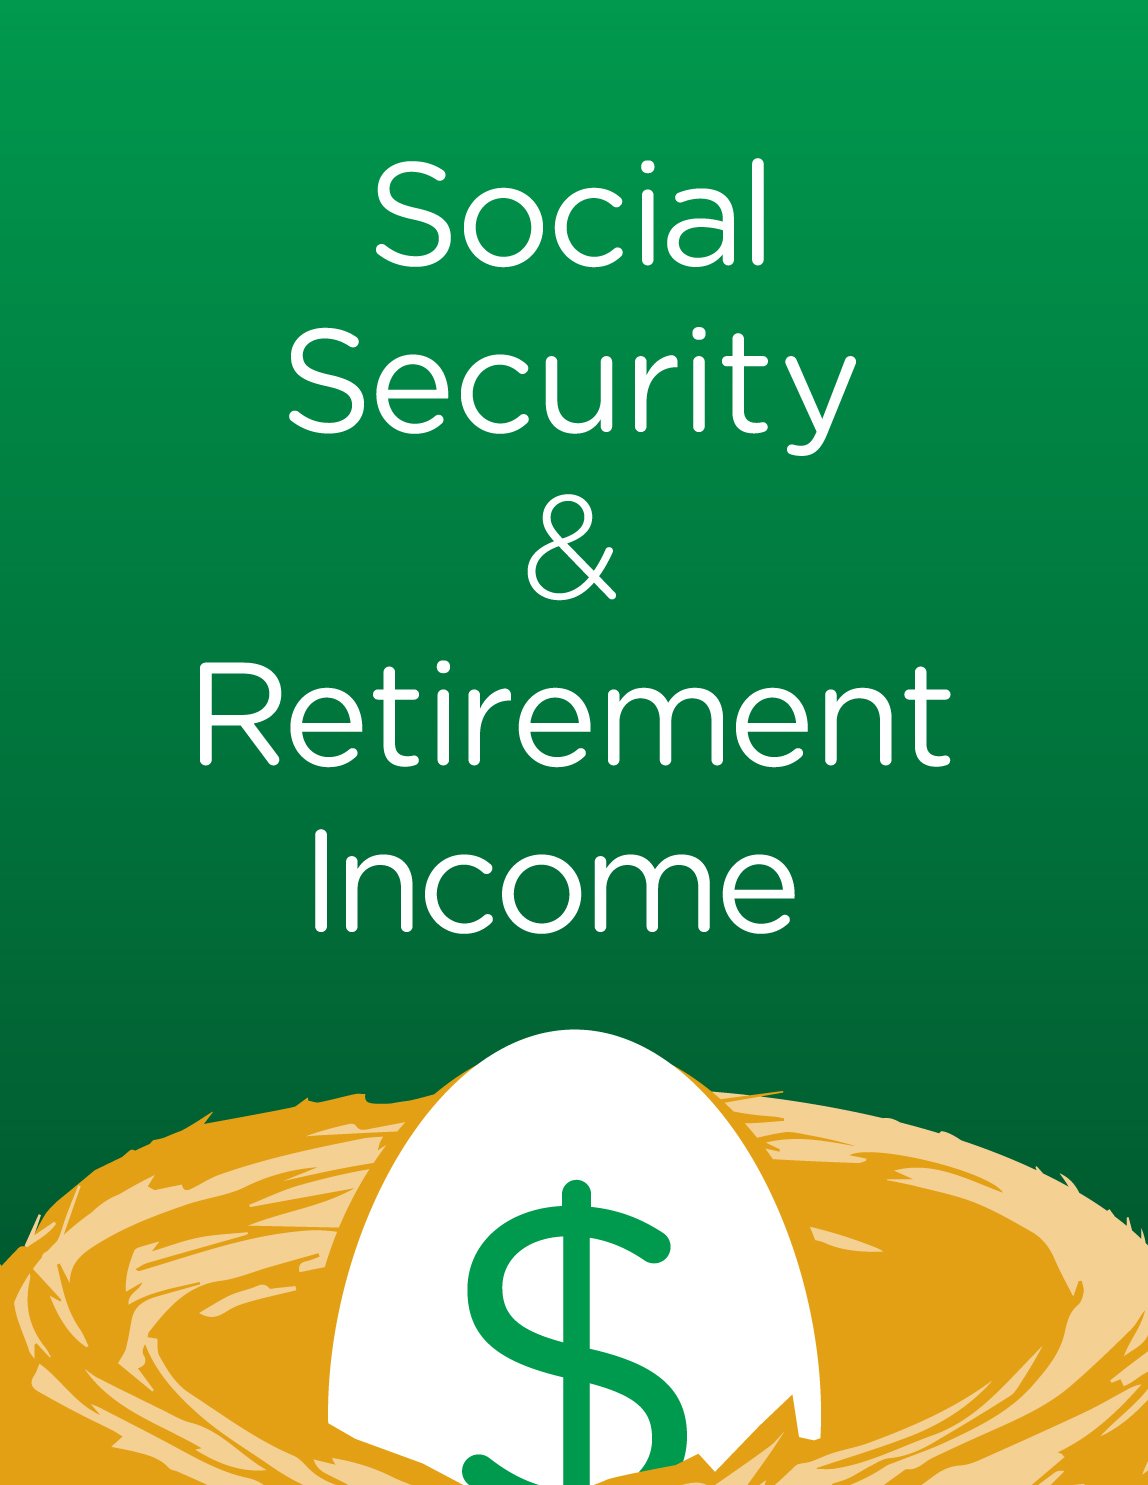 Social Security & Retirement Income